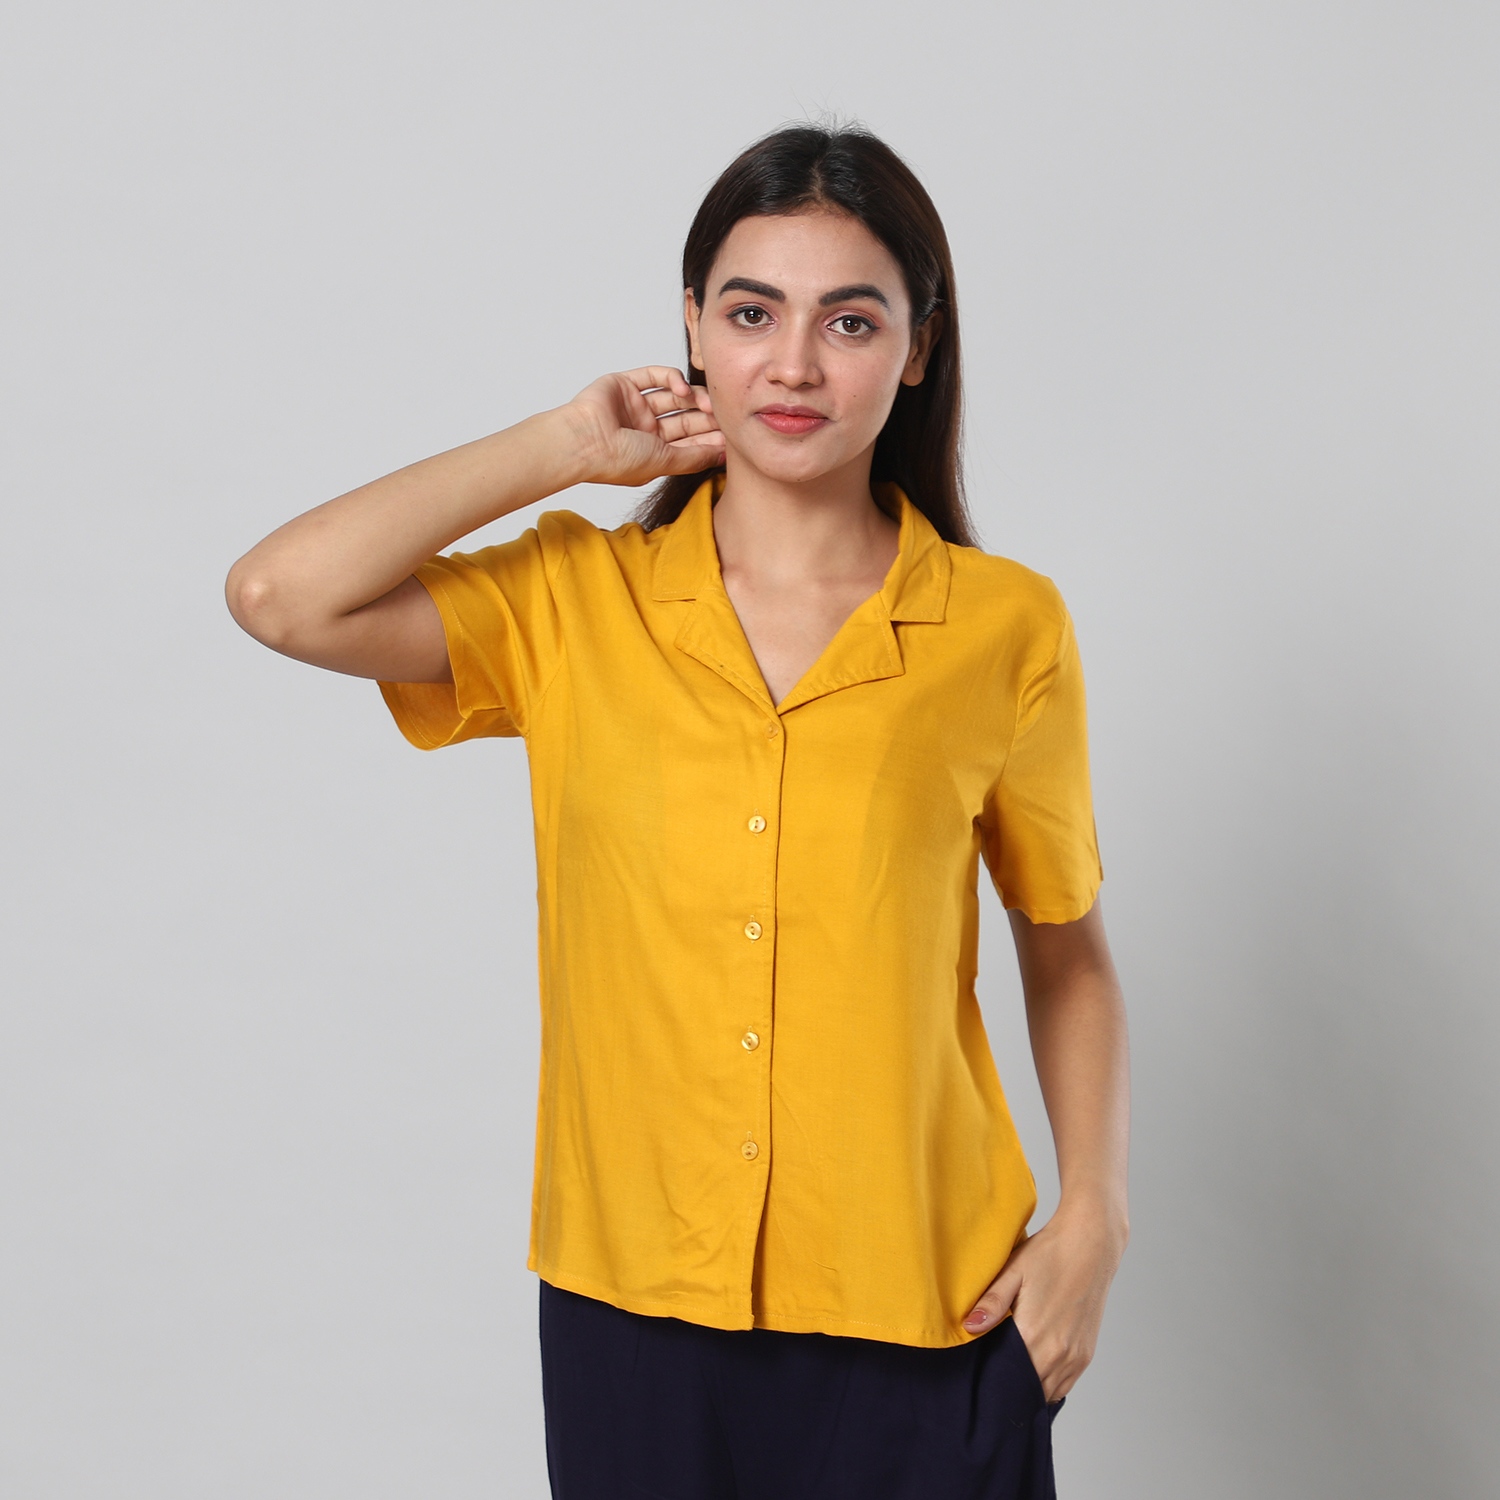 JOVIE 100% Viscose Top with Collar and Button Closure (Size:L, 61x101Cm) - Yellow